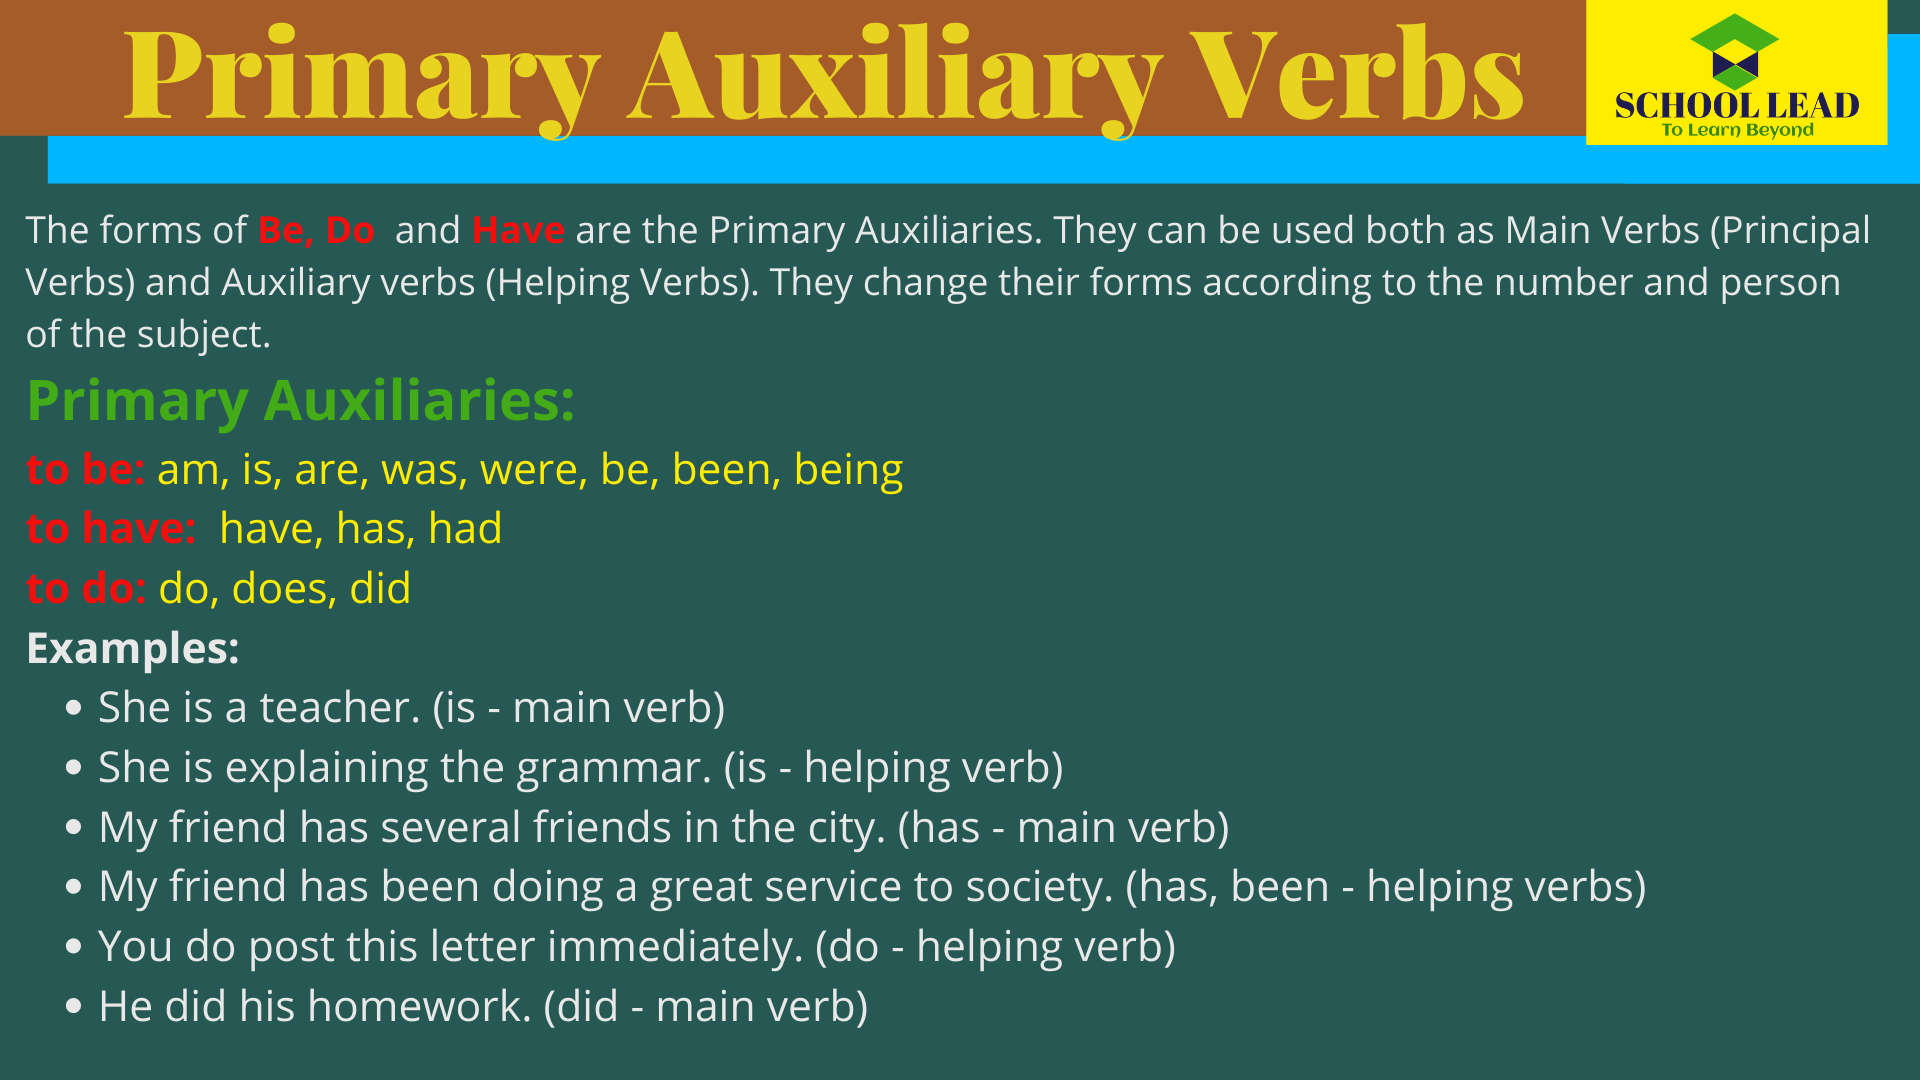 Primary Auxiliary Verbs The Verb School Lead